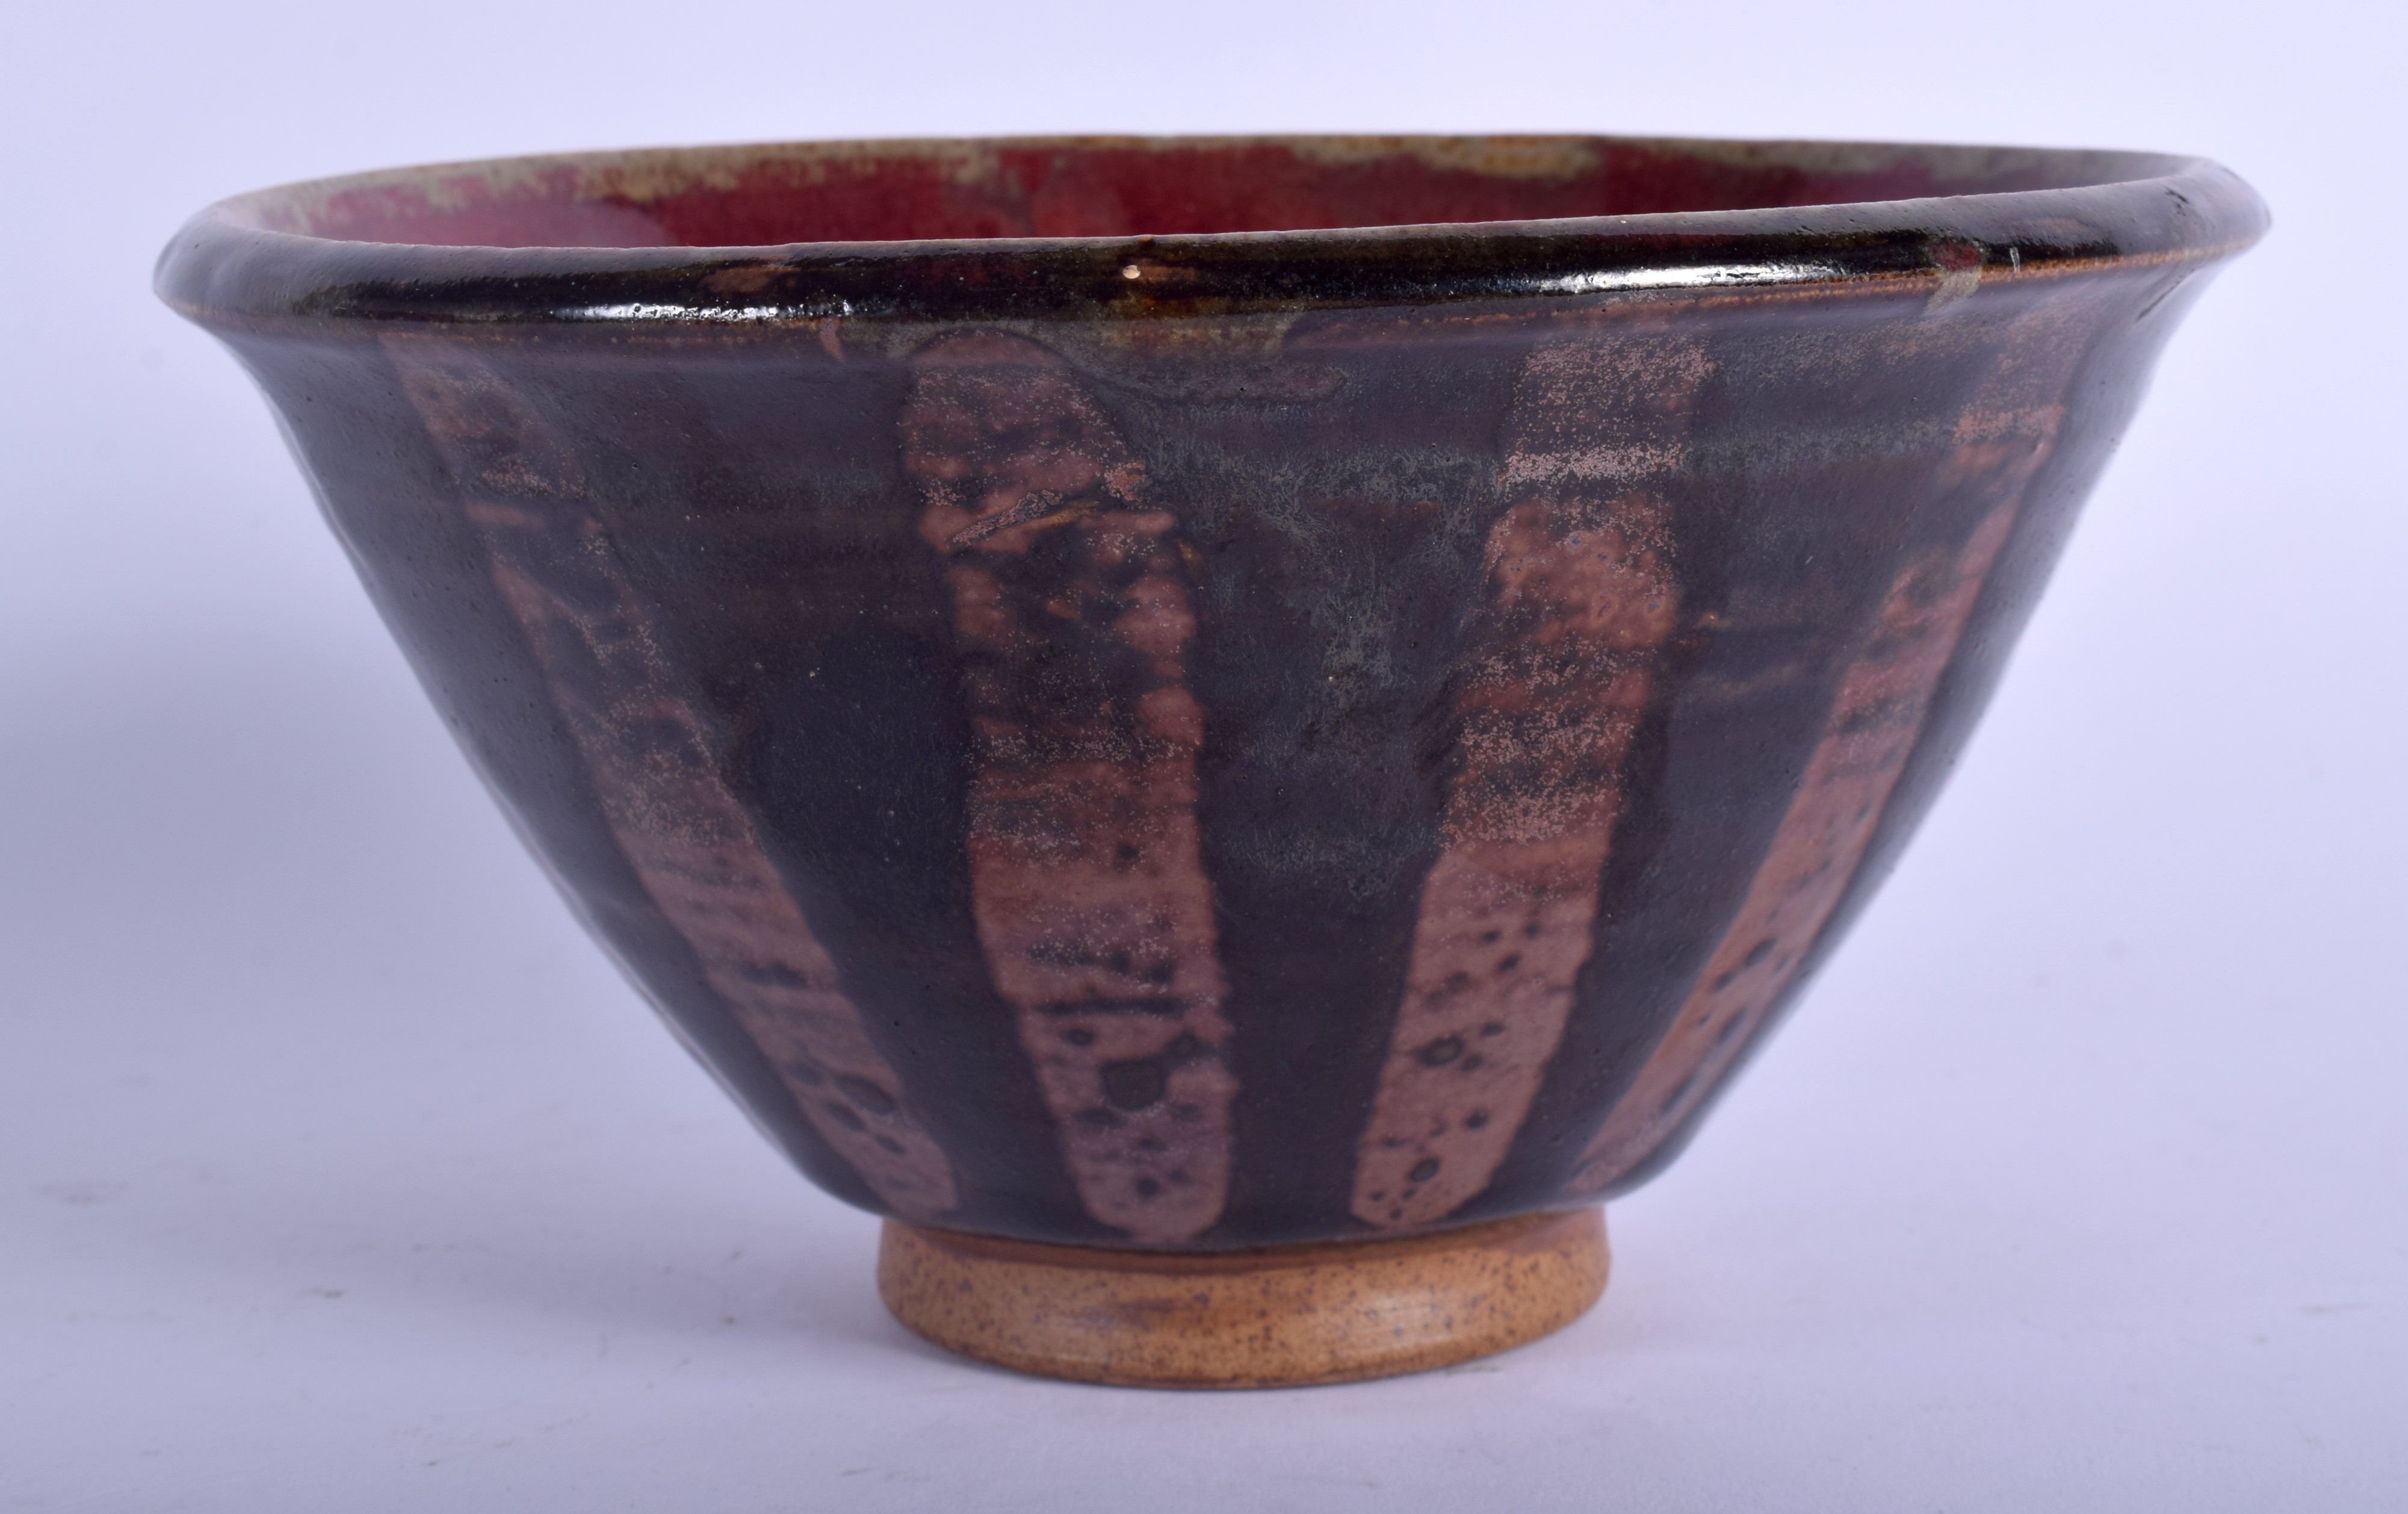 A CONTEMPOARY STUDIO POTTERY STONEWARE BOWL modelled in the Chinese style. 17 cm diameter.